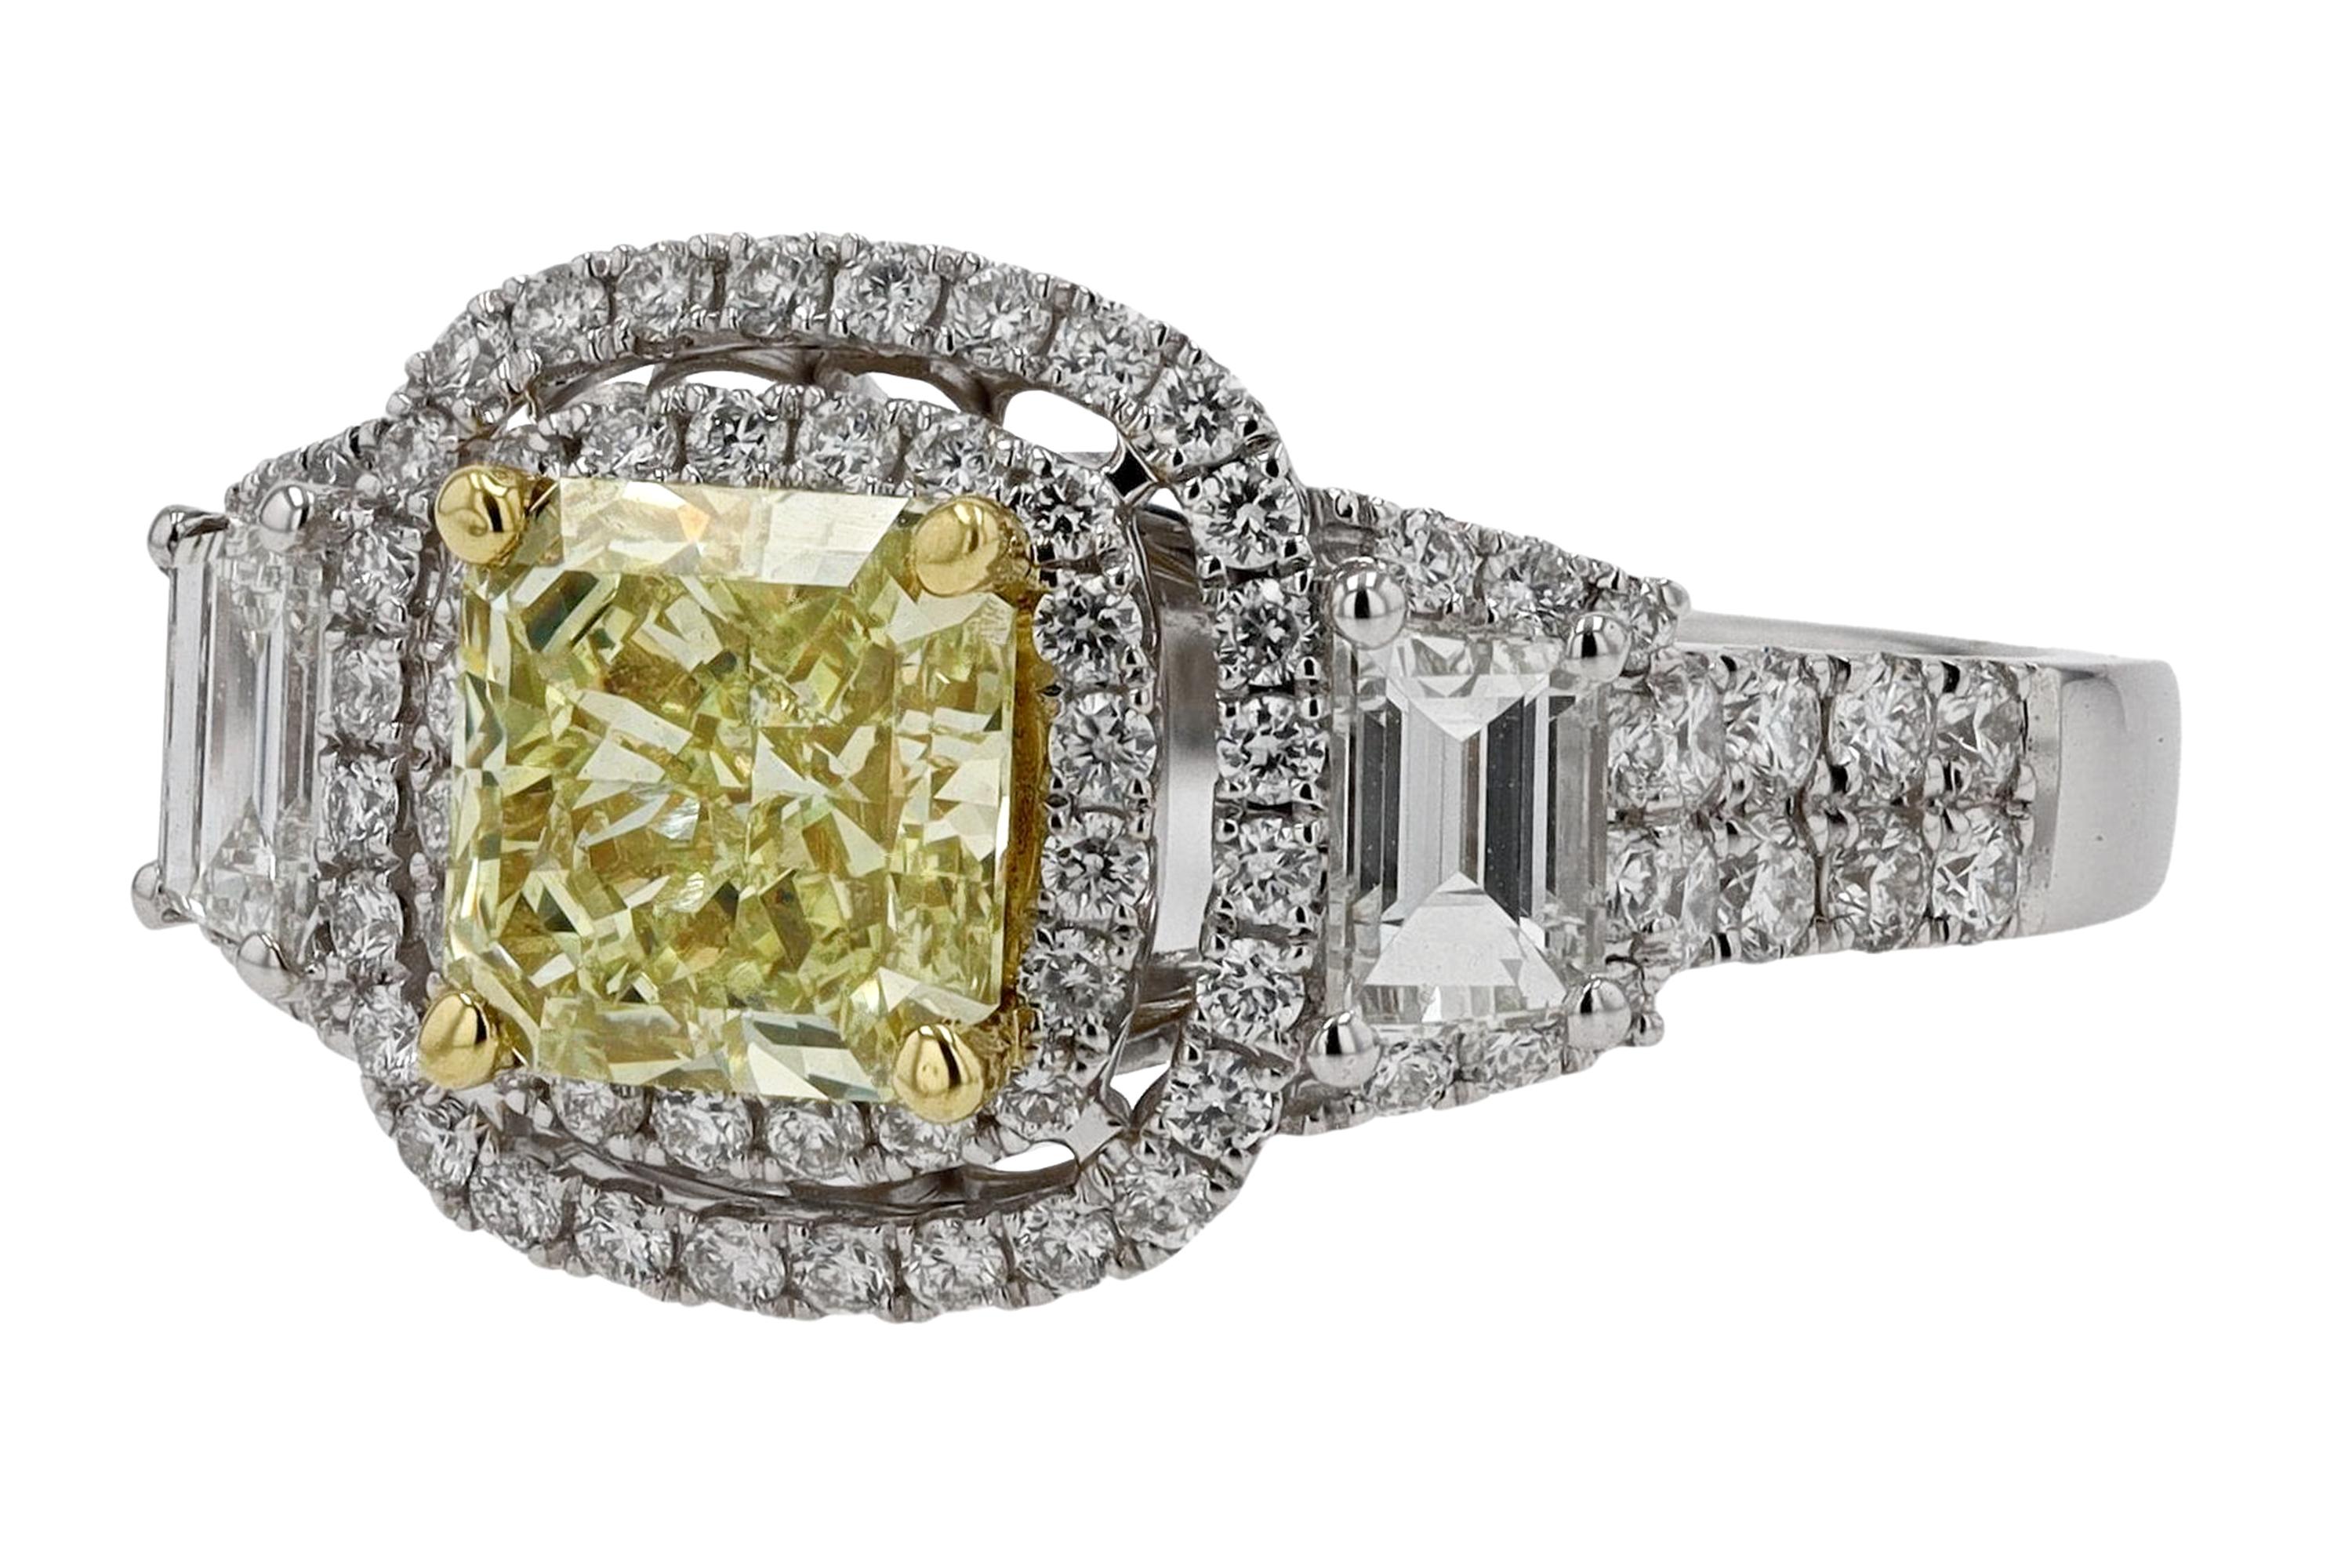 GIA Certified 1.55 Carat Fancy Yellow Diamond Engagement Ring In Good Condition For Sale In Santa Barbara, CA